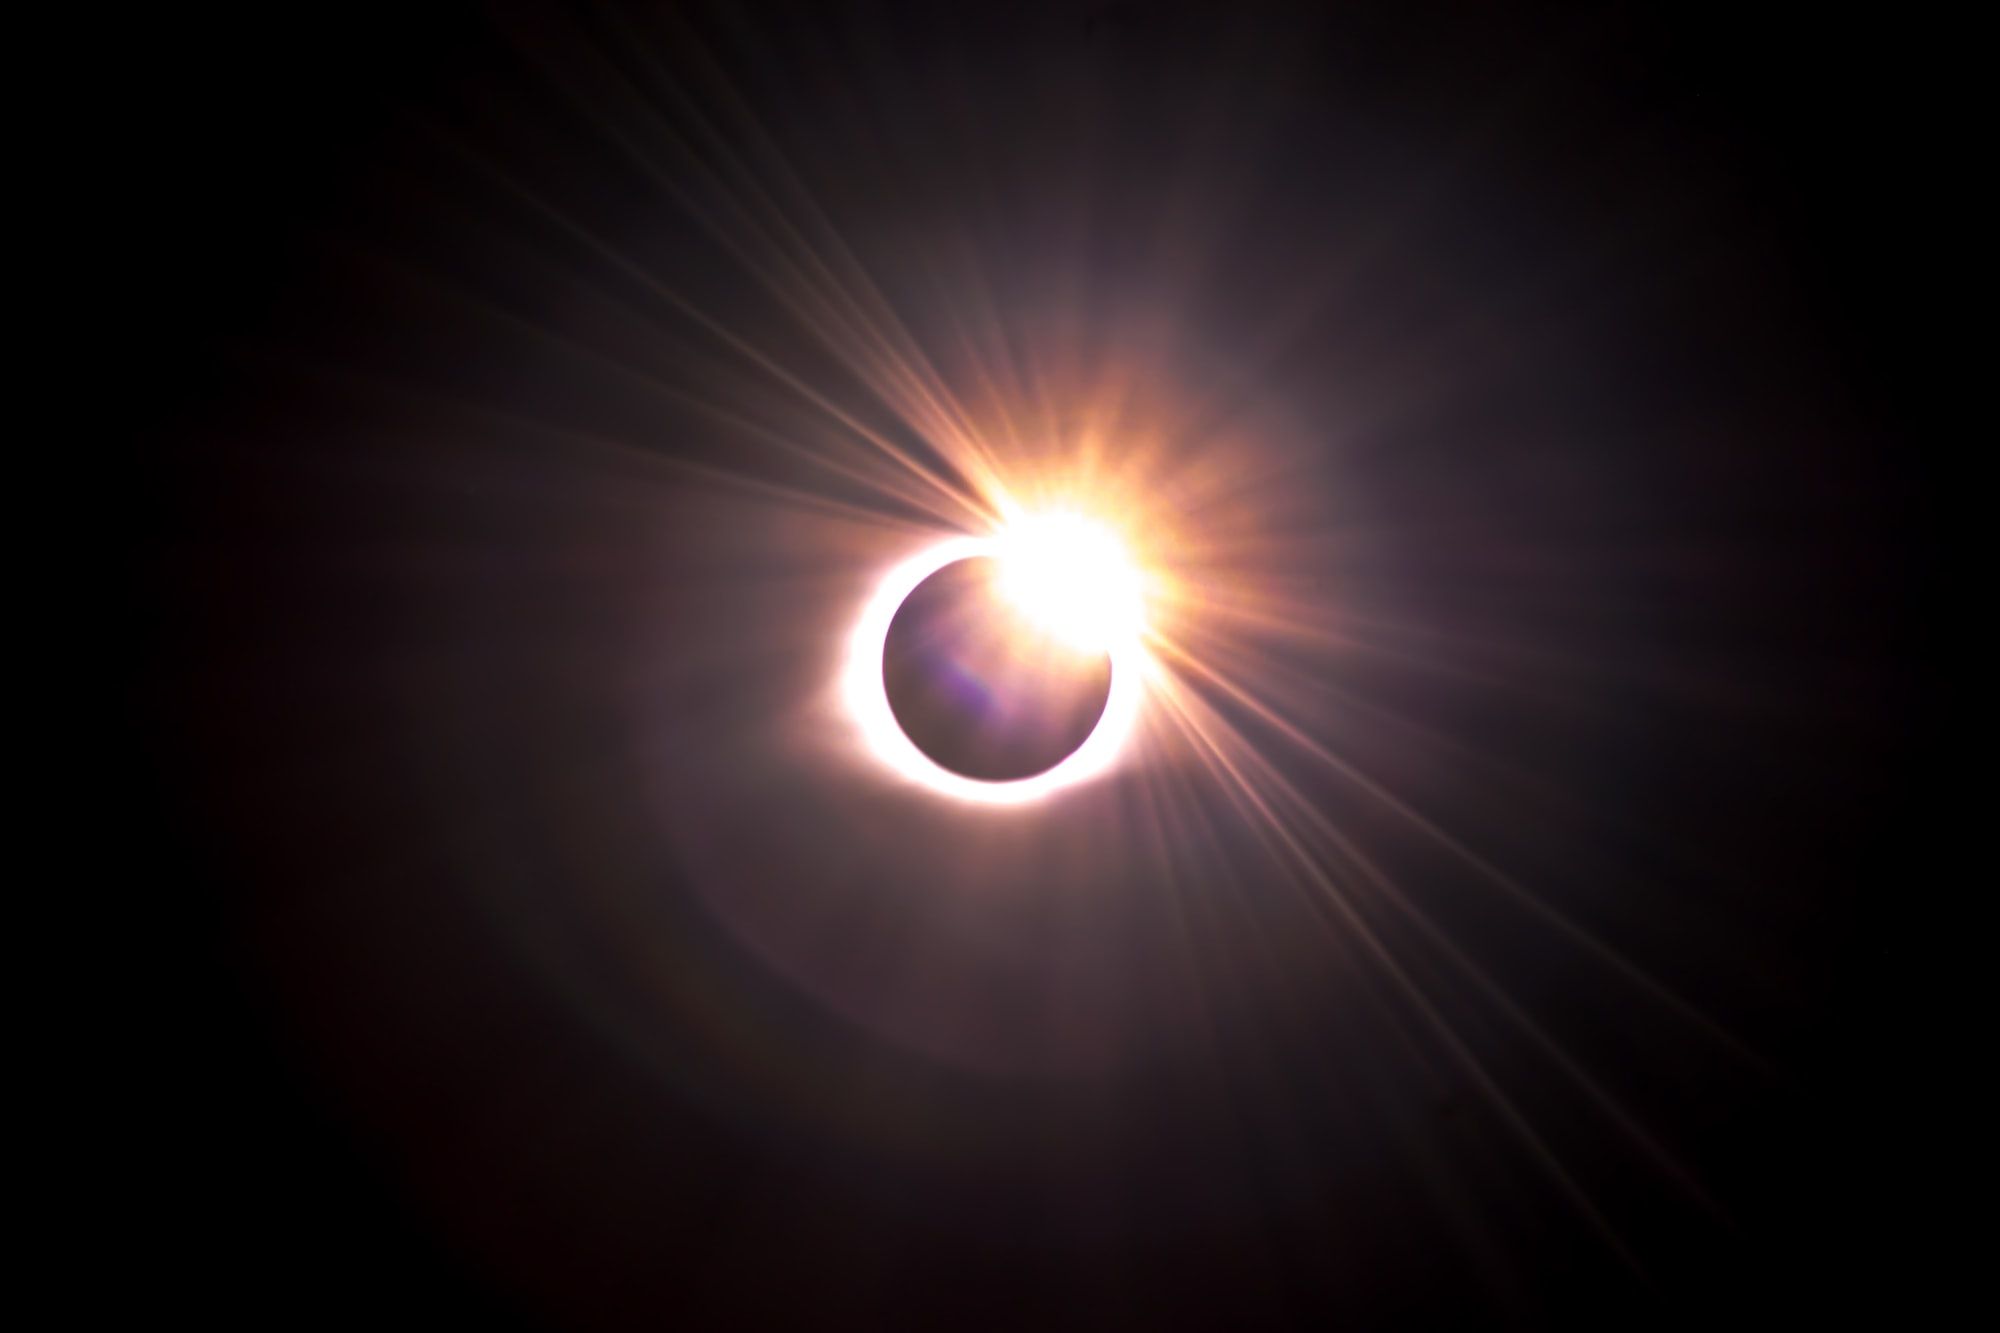 Witness the Earth, Moon, and Sun in a celestial showdown during a total solar eclipse.